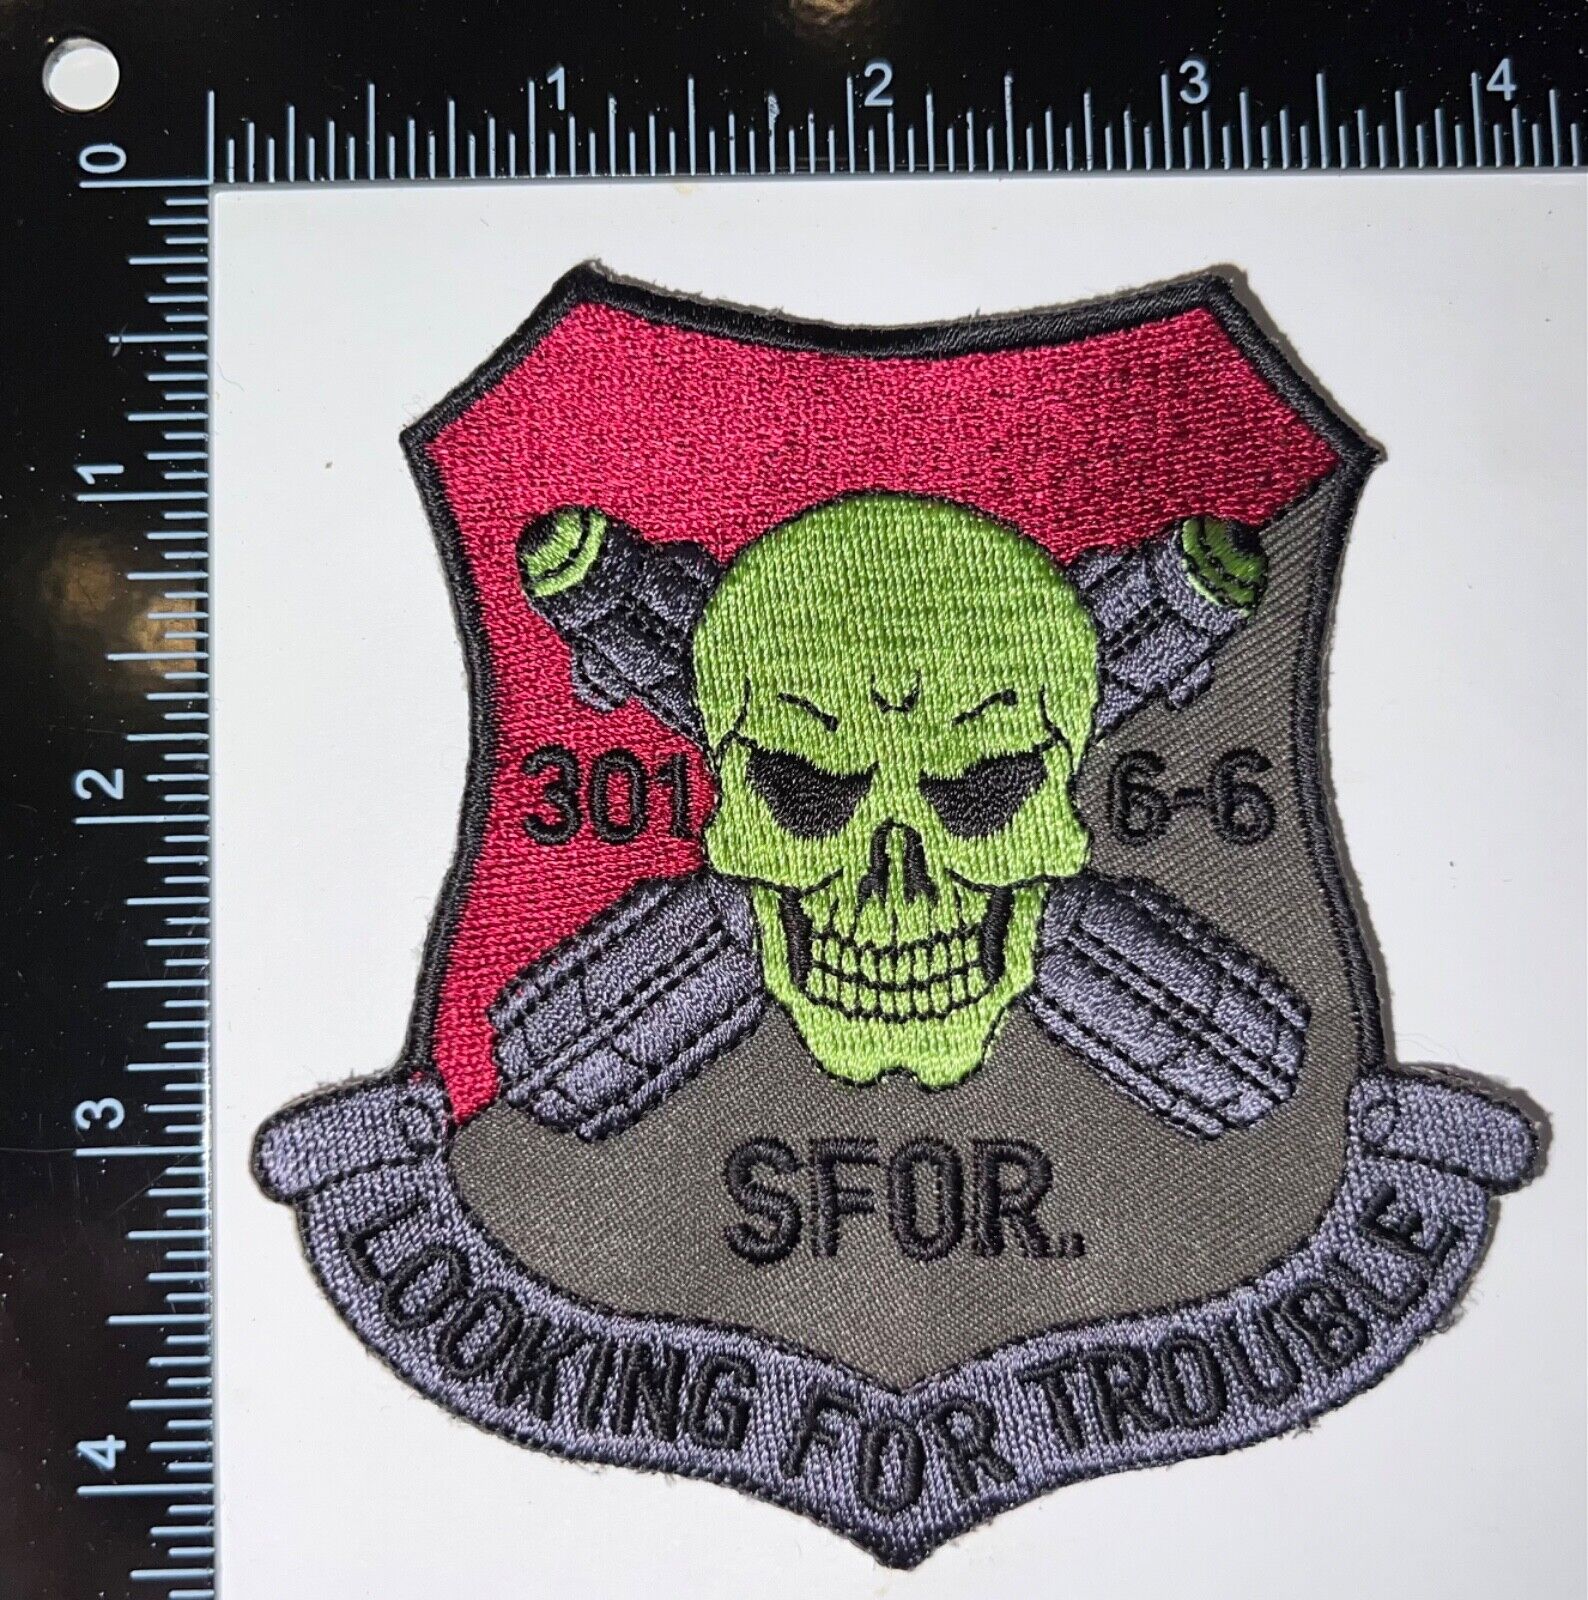 USAF SFOR Bosnia 301st 6-6 Intelligence Squadron Looking For Trouble Patch